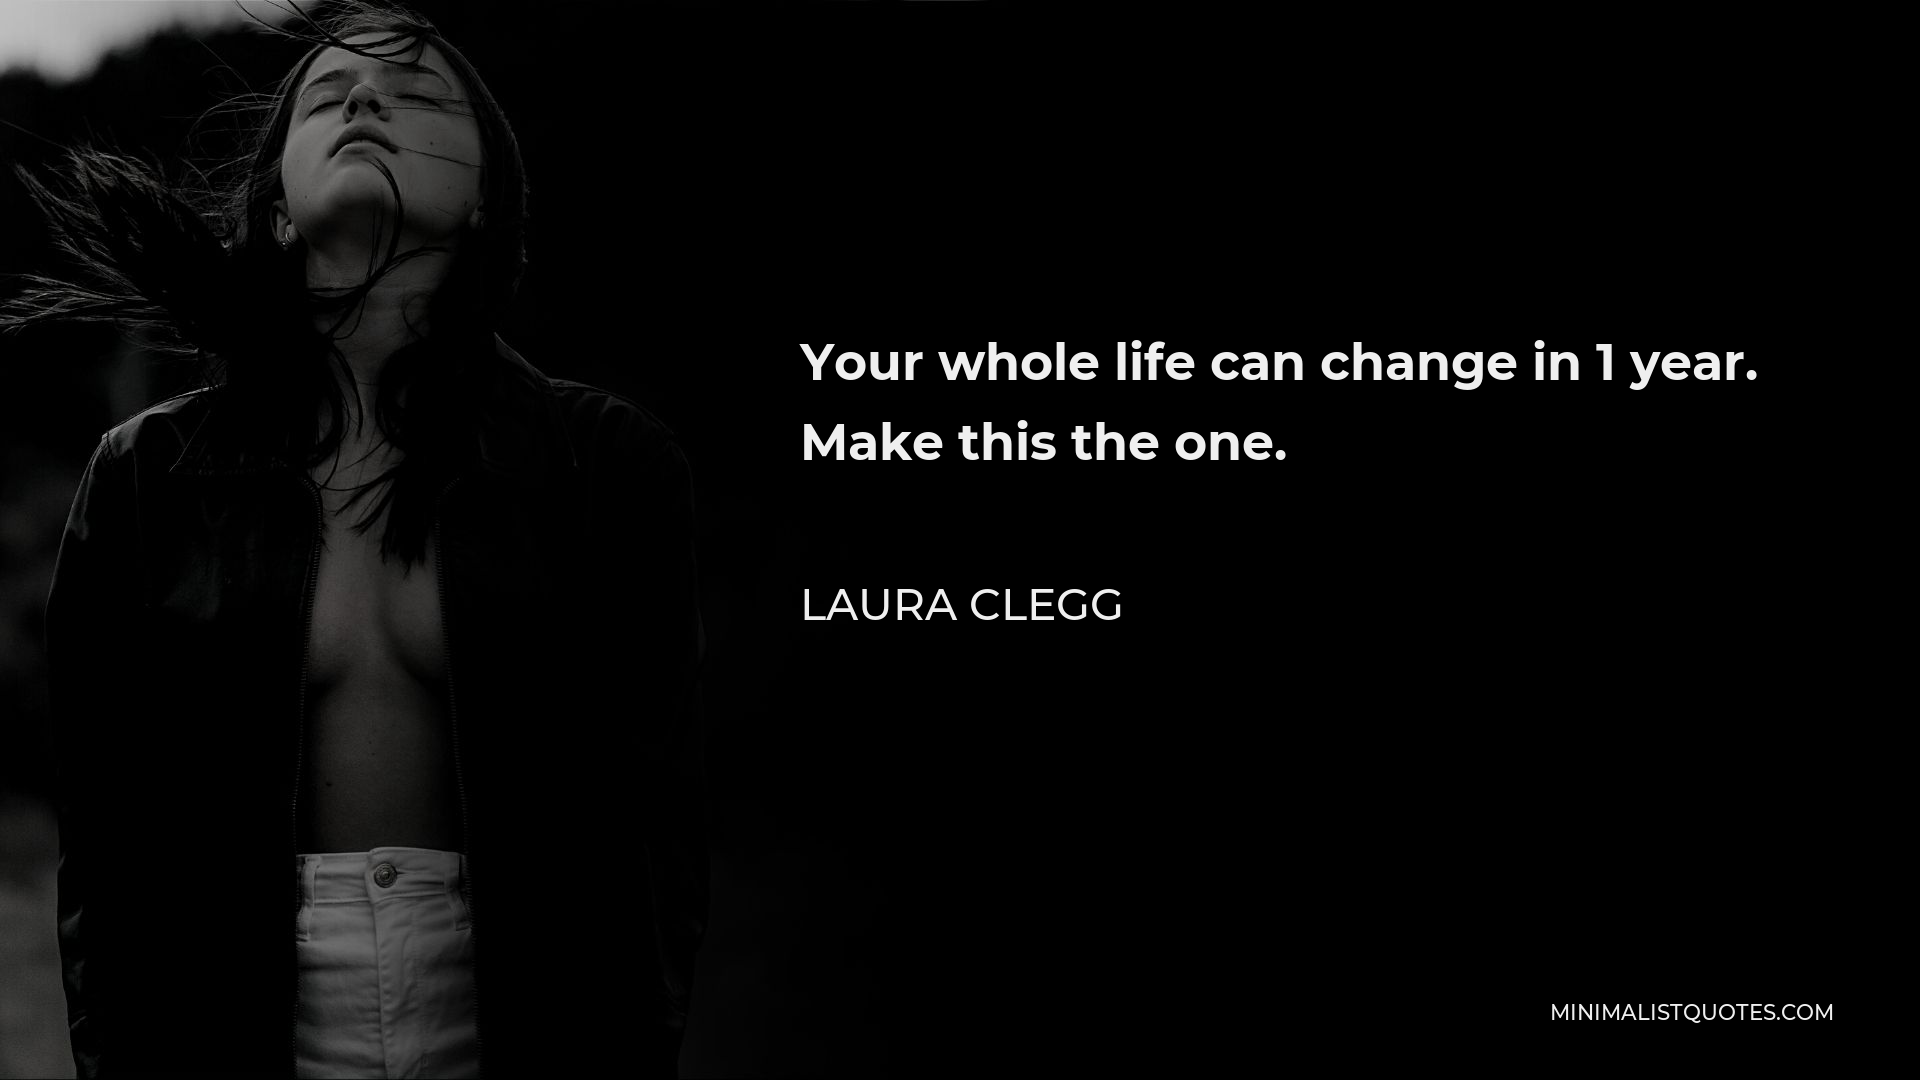 Laura Clegg Quote - Your whole life can change in 1 year. Make this the one.